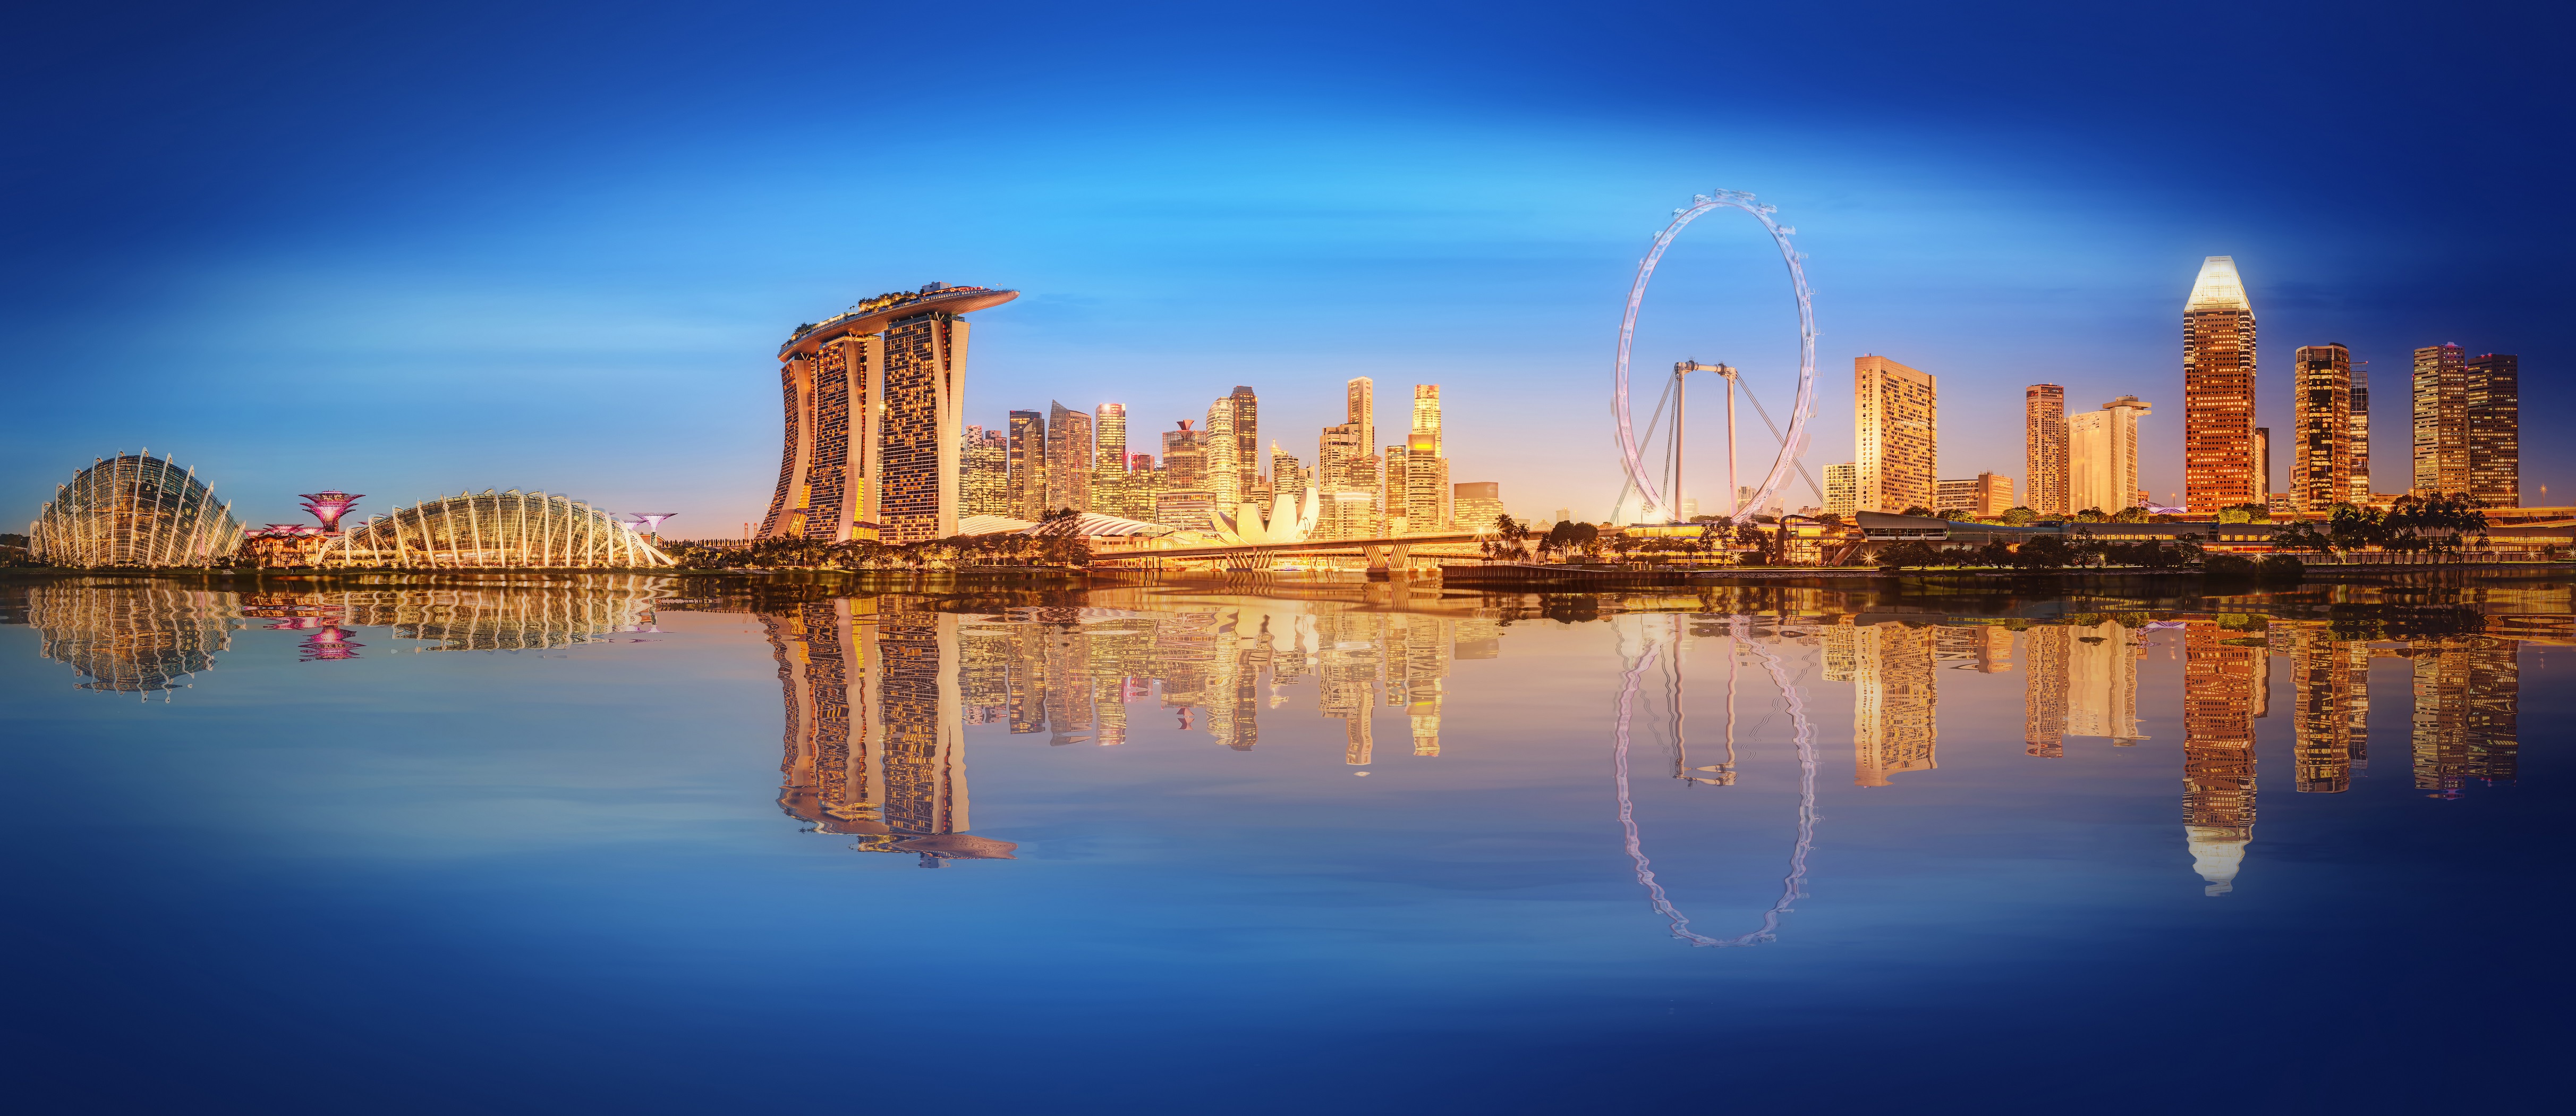 Download mobile wallpaper Cities, Night, City, Skyscraper, Building, Reflection, Ferris Wheel, Singapore, Man Made, Marina Bay Sands for free.